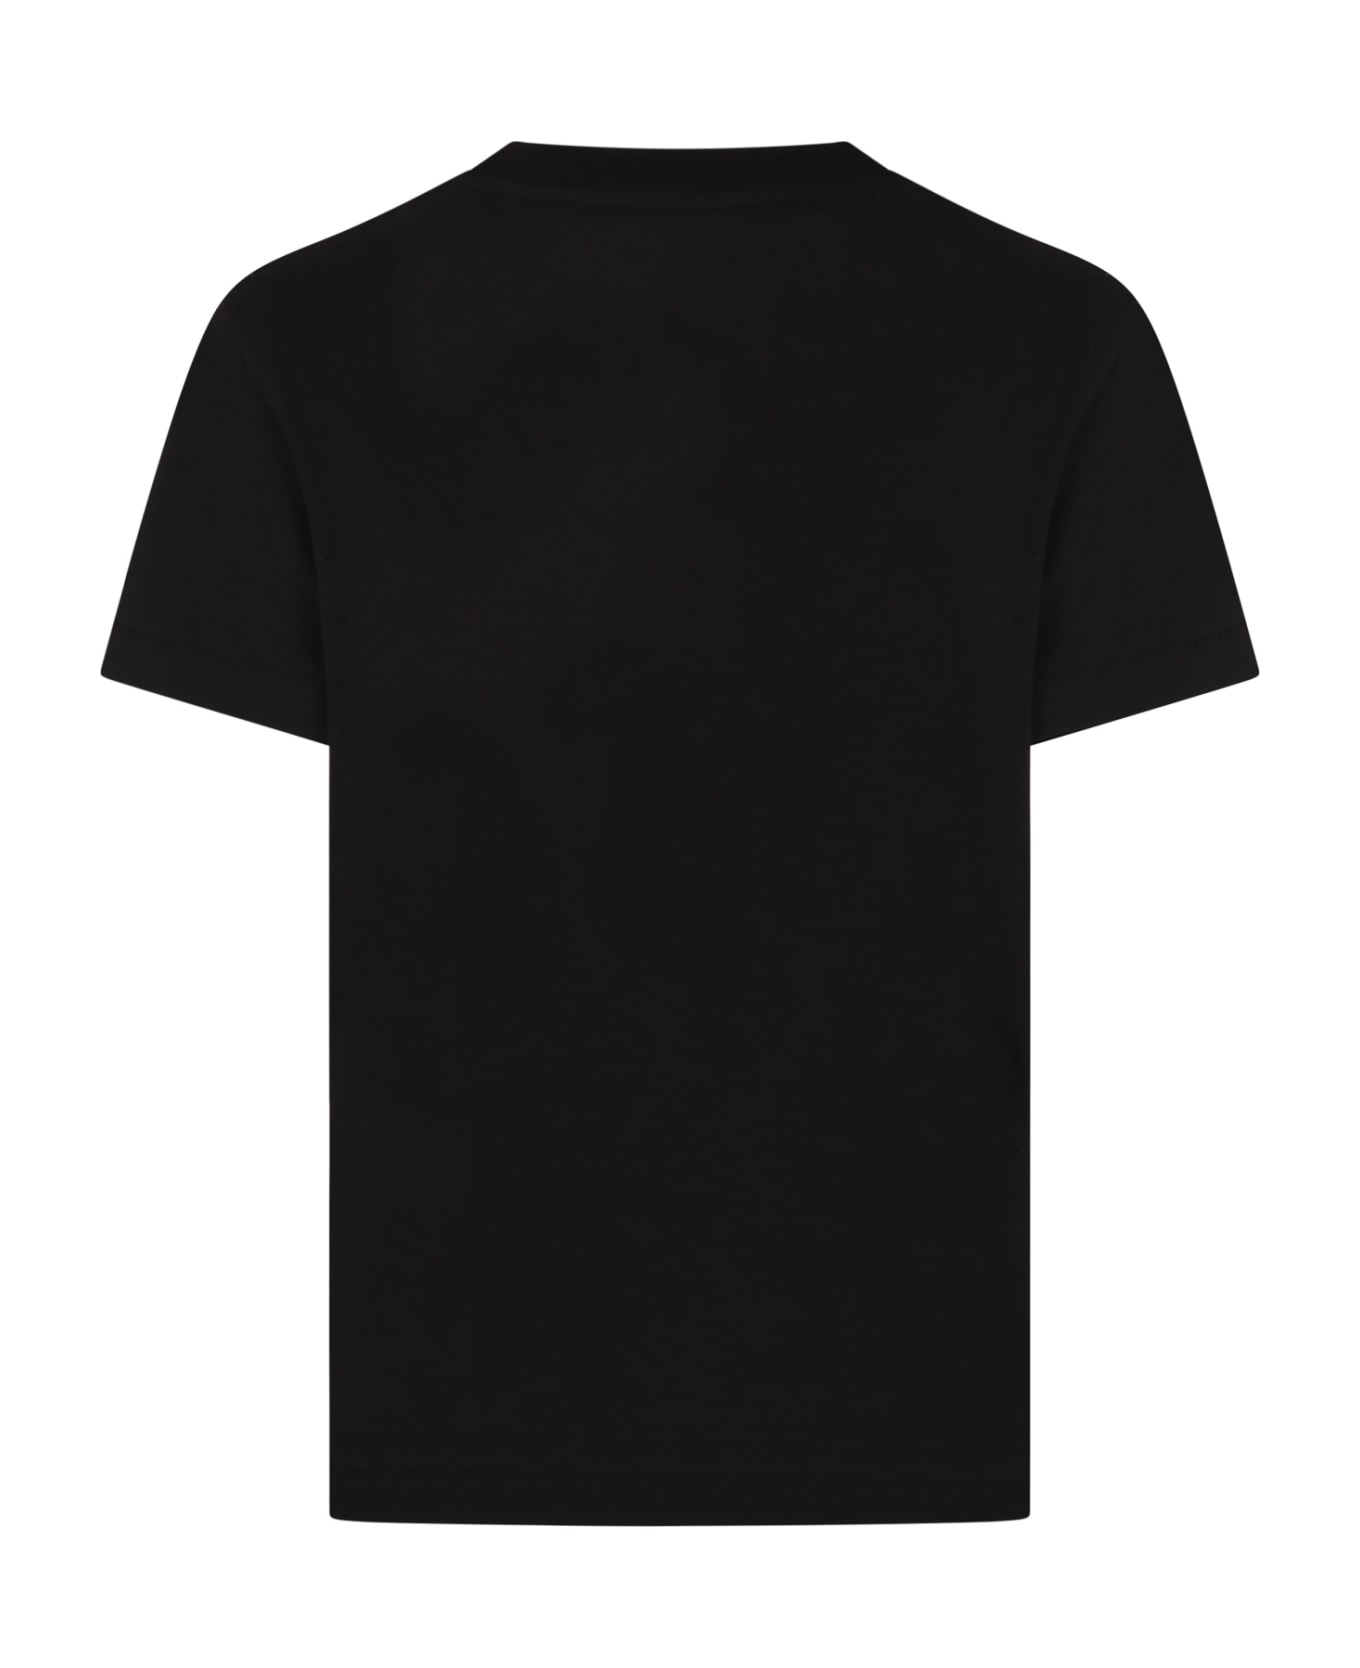 Fendi Black T-shirt For Kids With Iconic Double F - Black